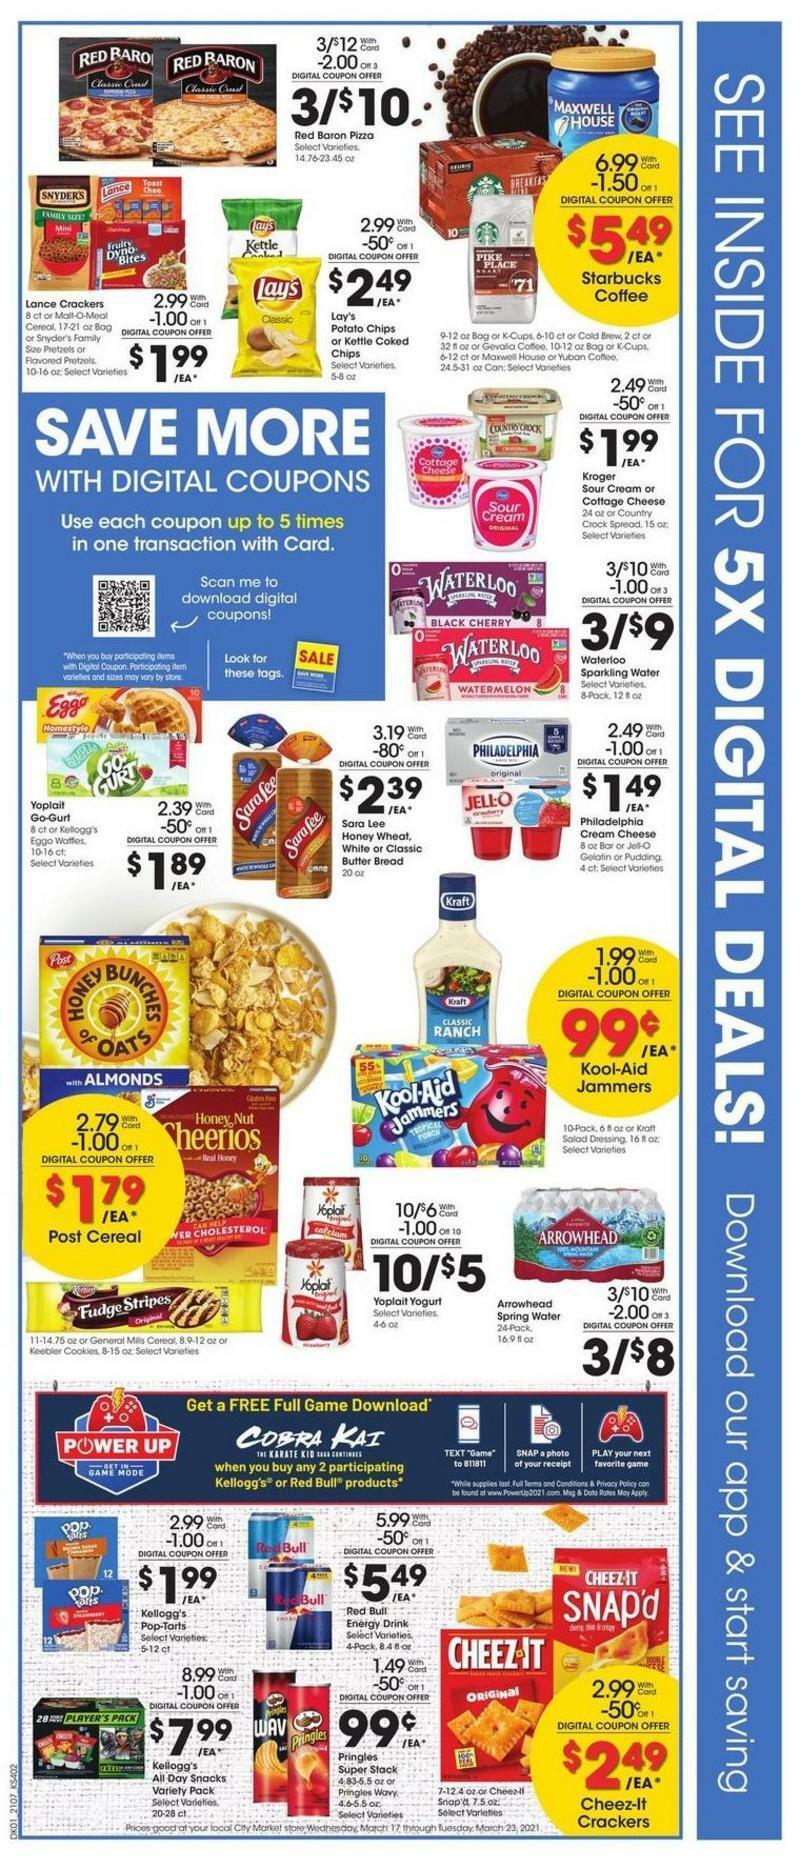 City Market Weekly Ad from March 17